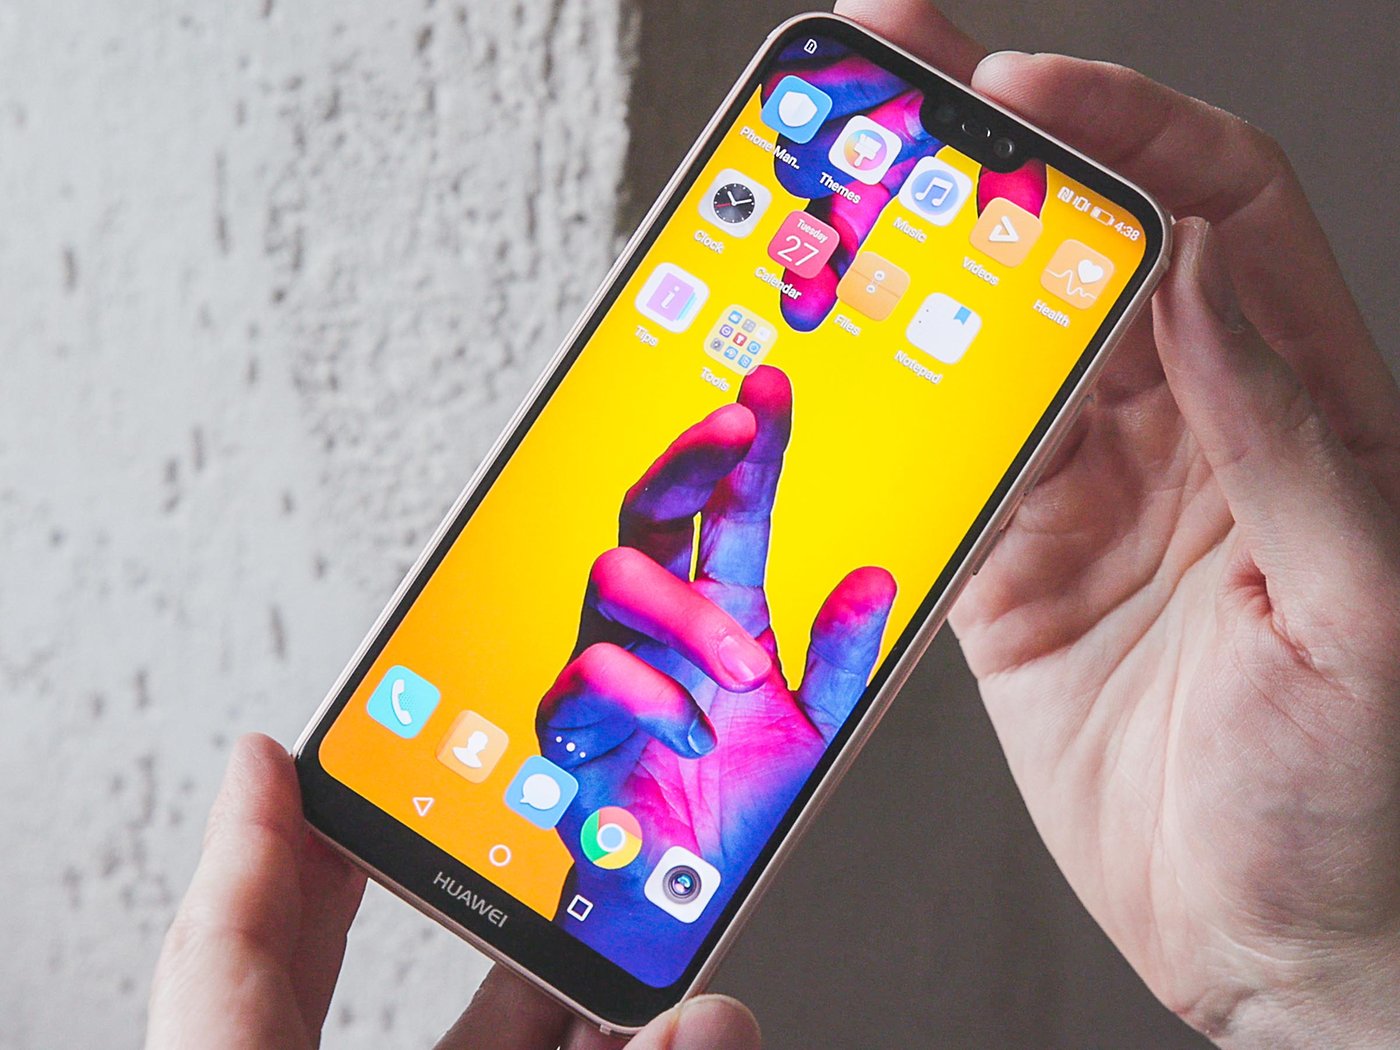 Grammatica Immoraliteit kennisgeving Huawei P20 Lite review: Is it really overrated? | NextPit